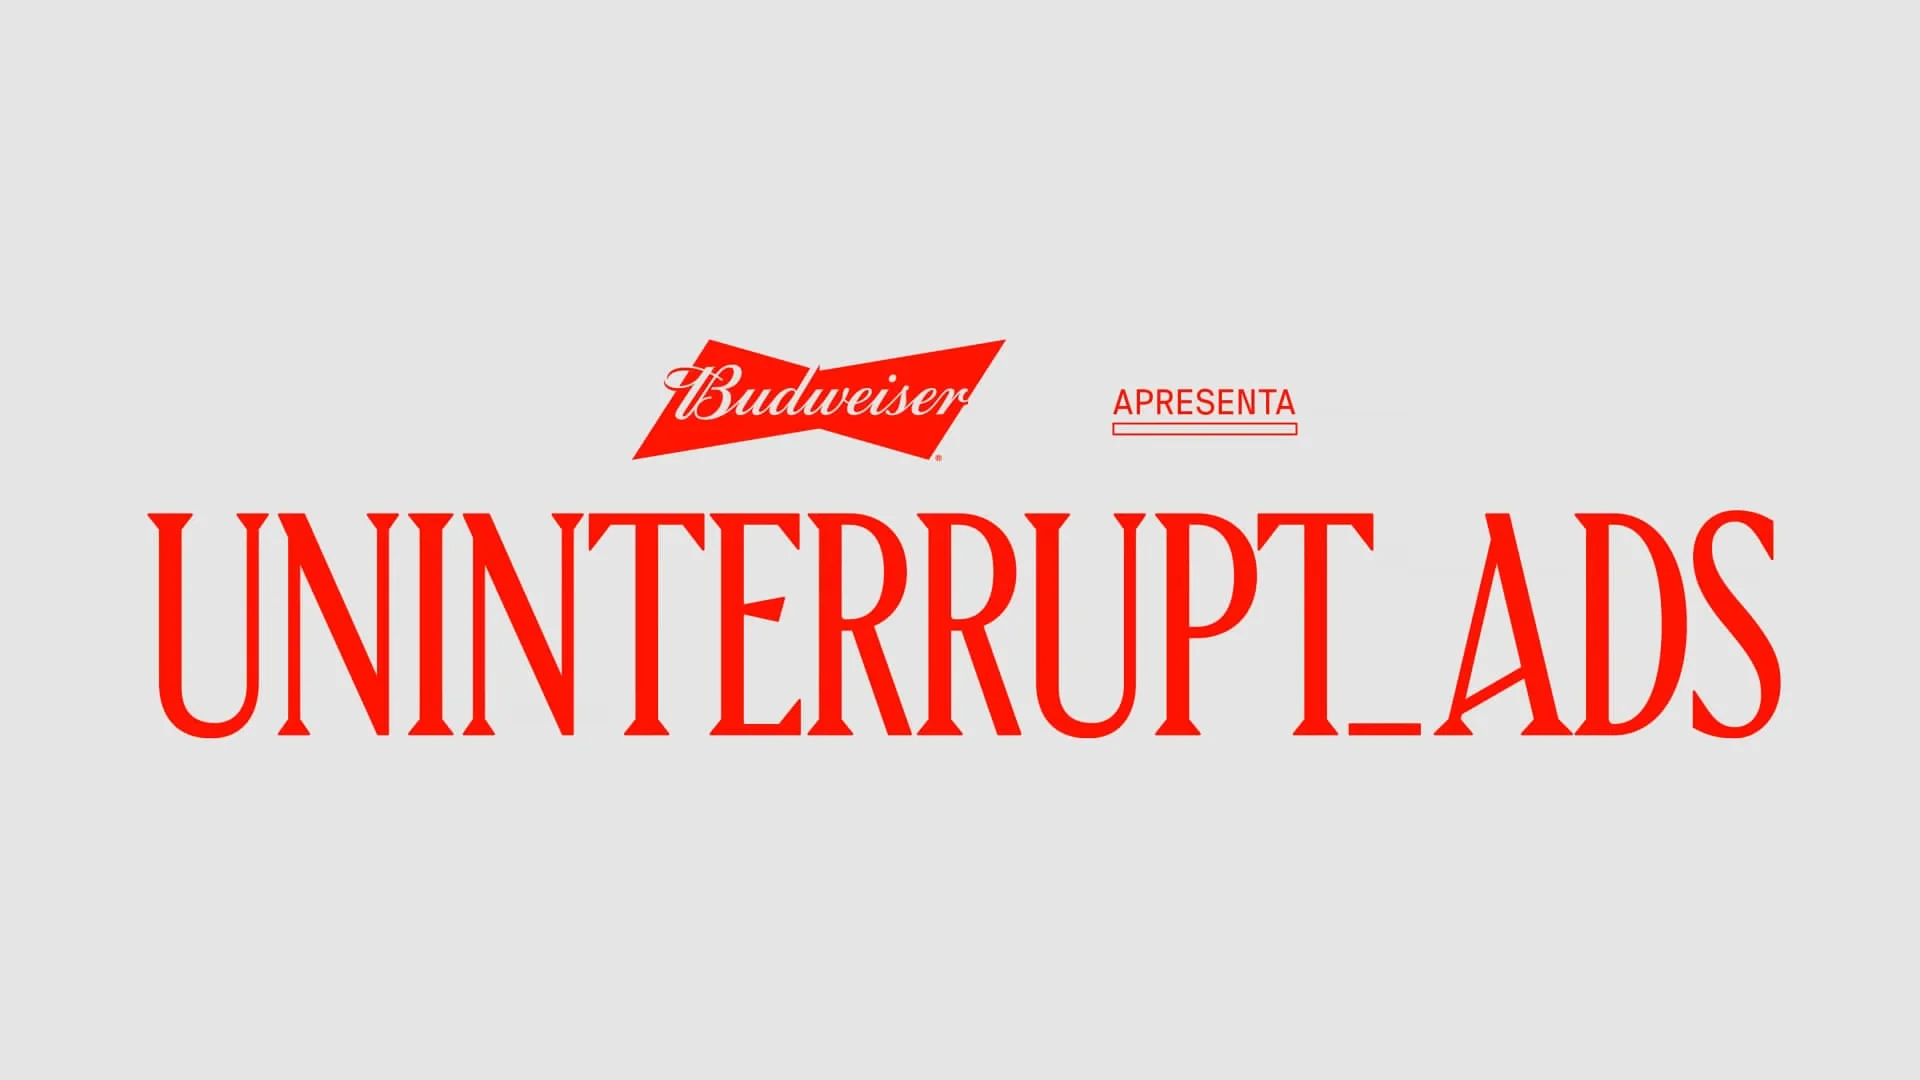 Budweiser presents Uninterrupted Ads campaign logo on a gray background